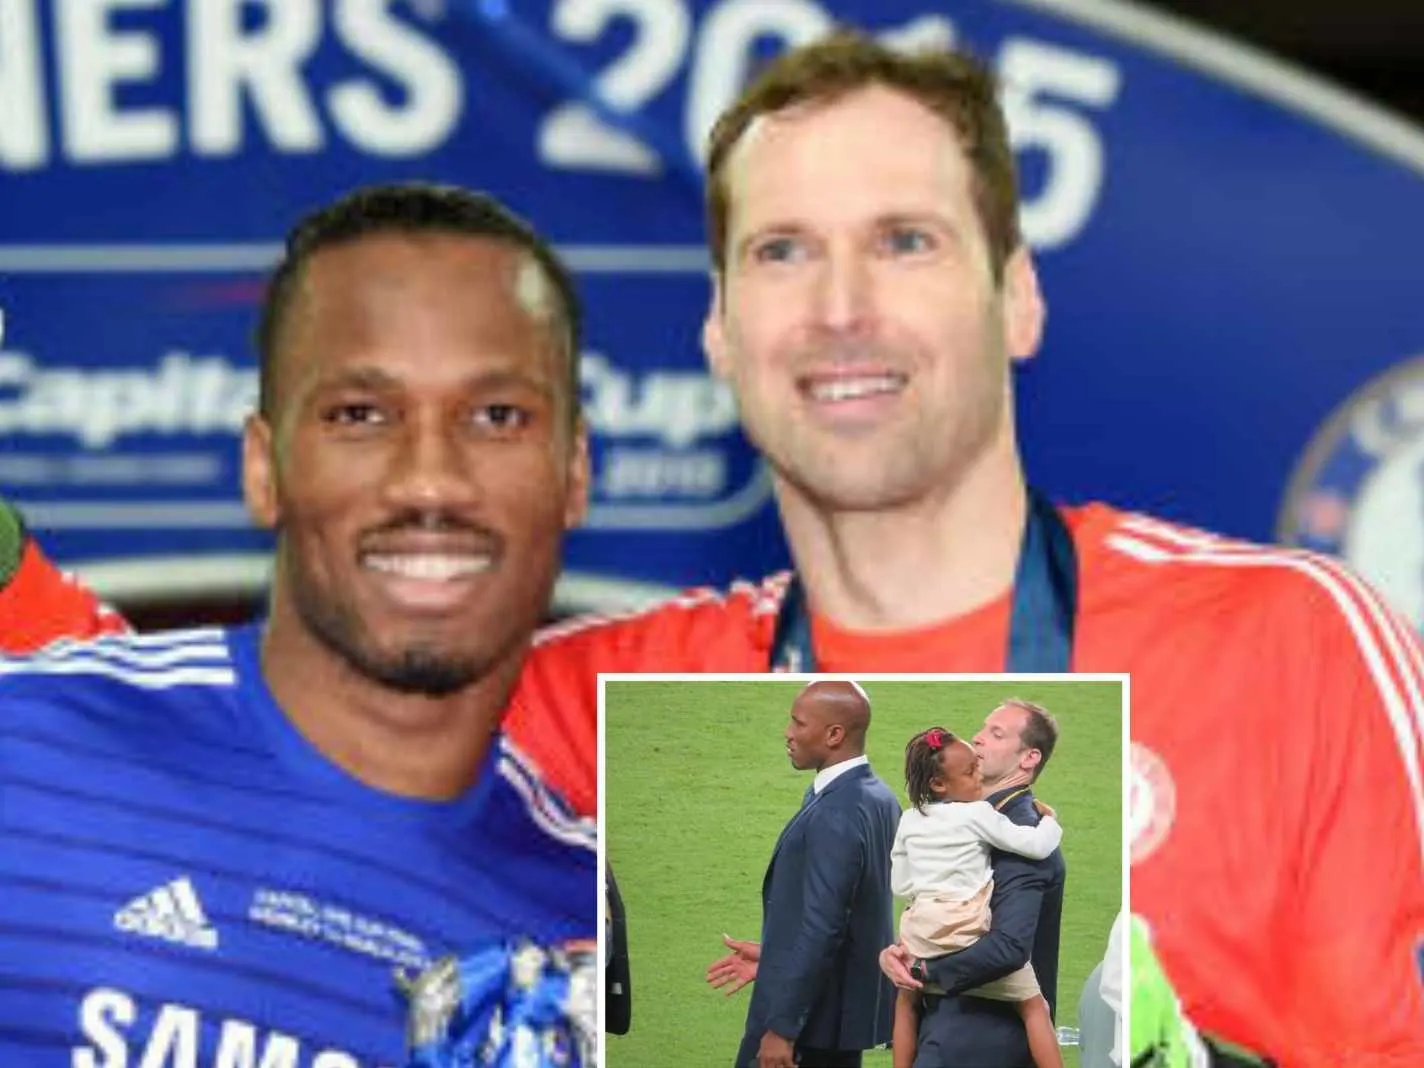 Photo featuring Cech and Drogba's daughter shows how strong the Chelsea bond is